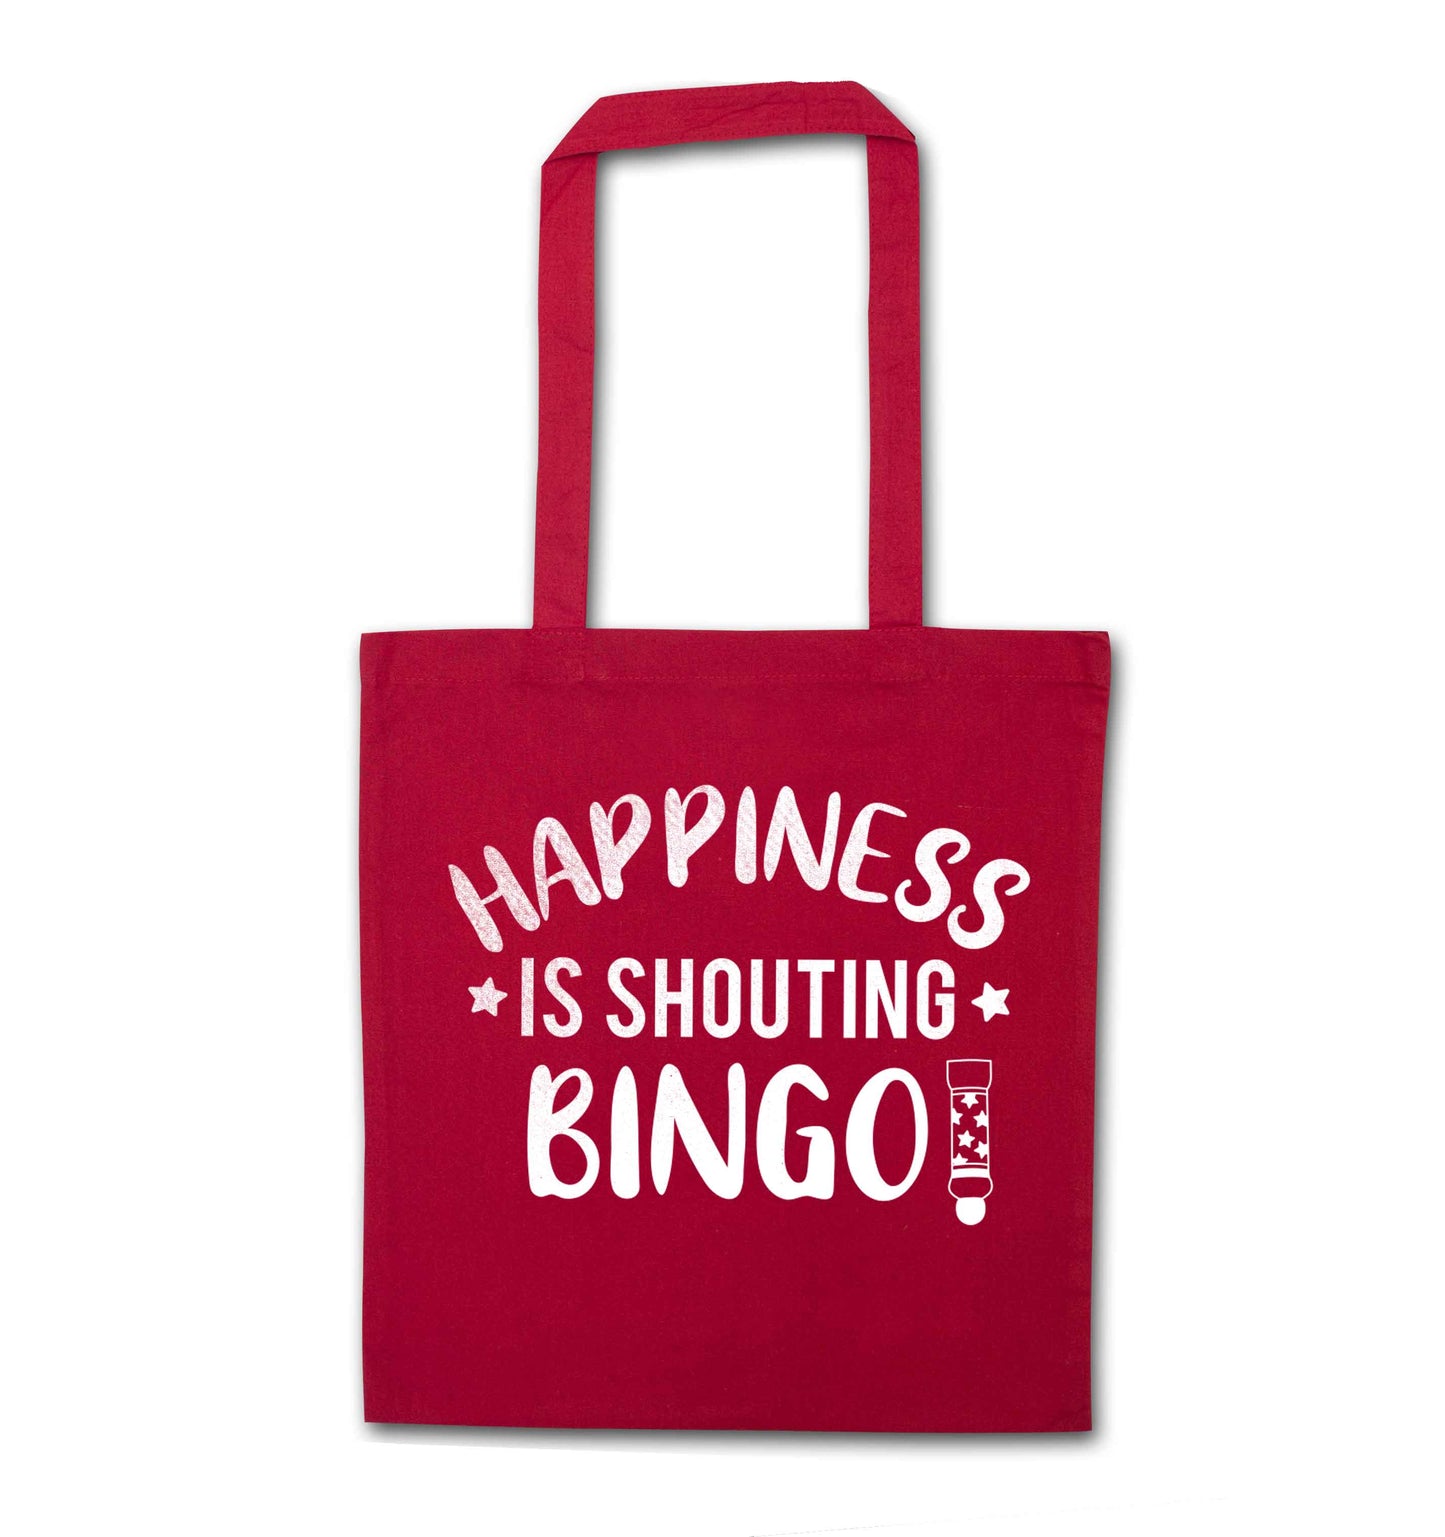 Happiness is shouting bingo! red tote bag